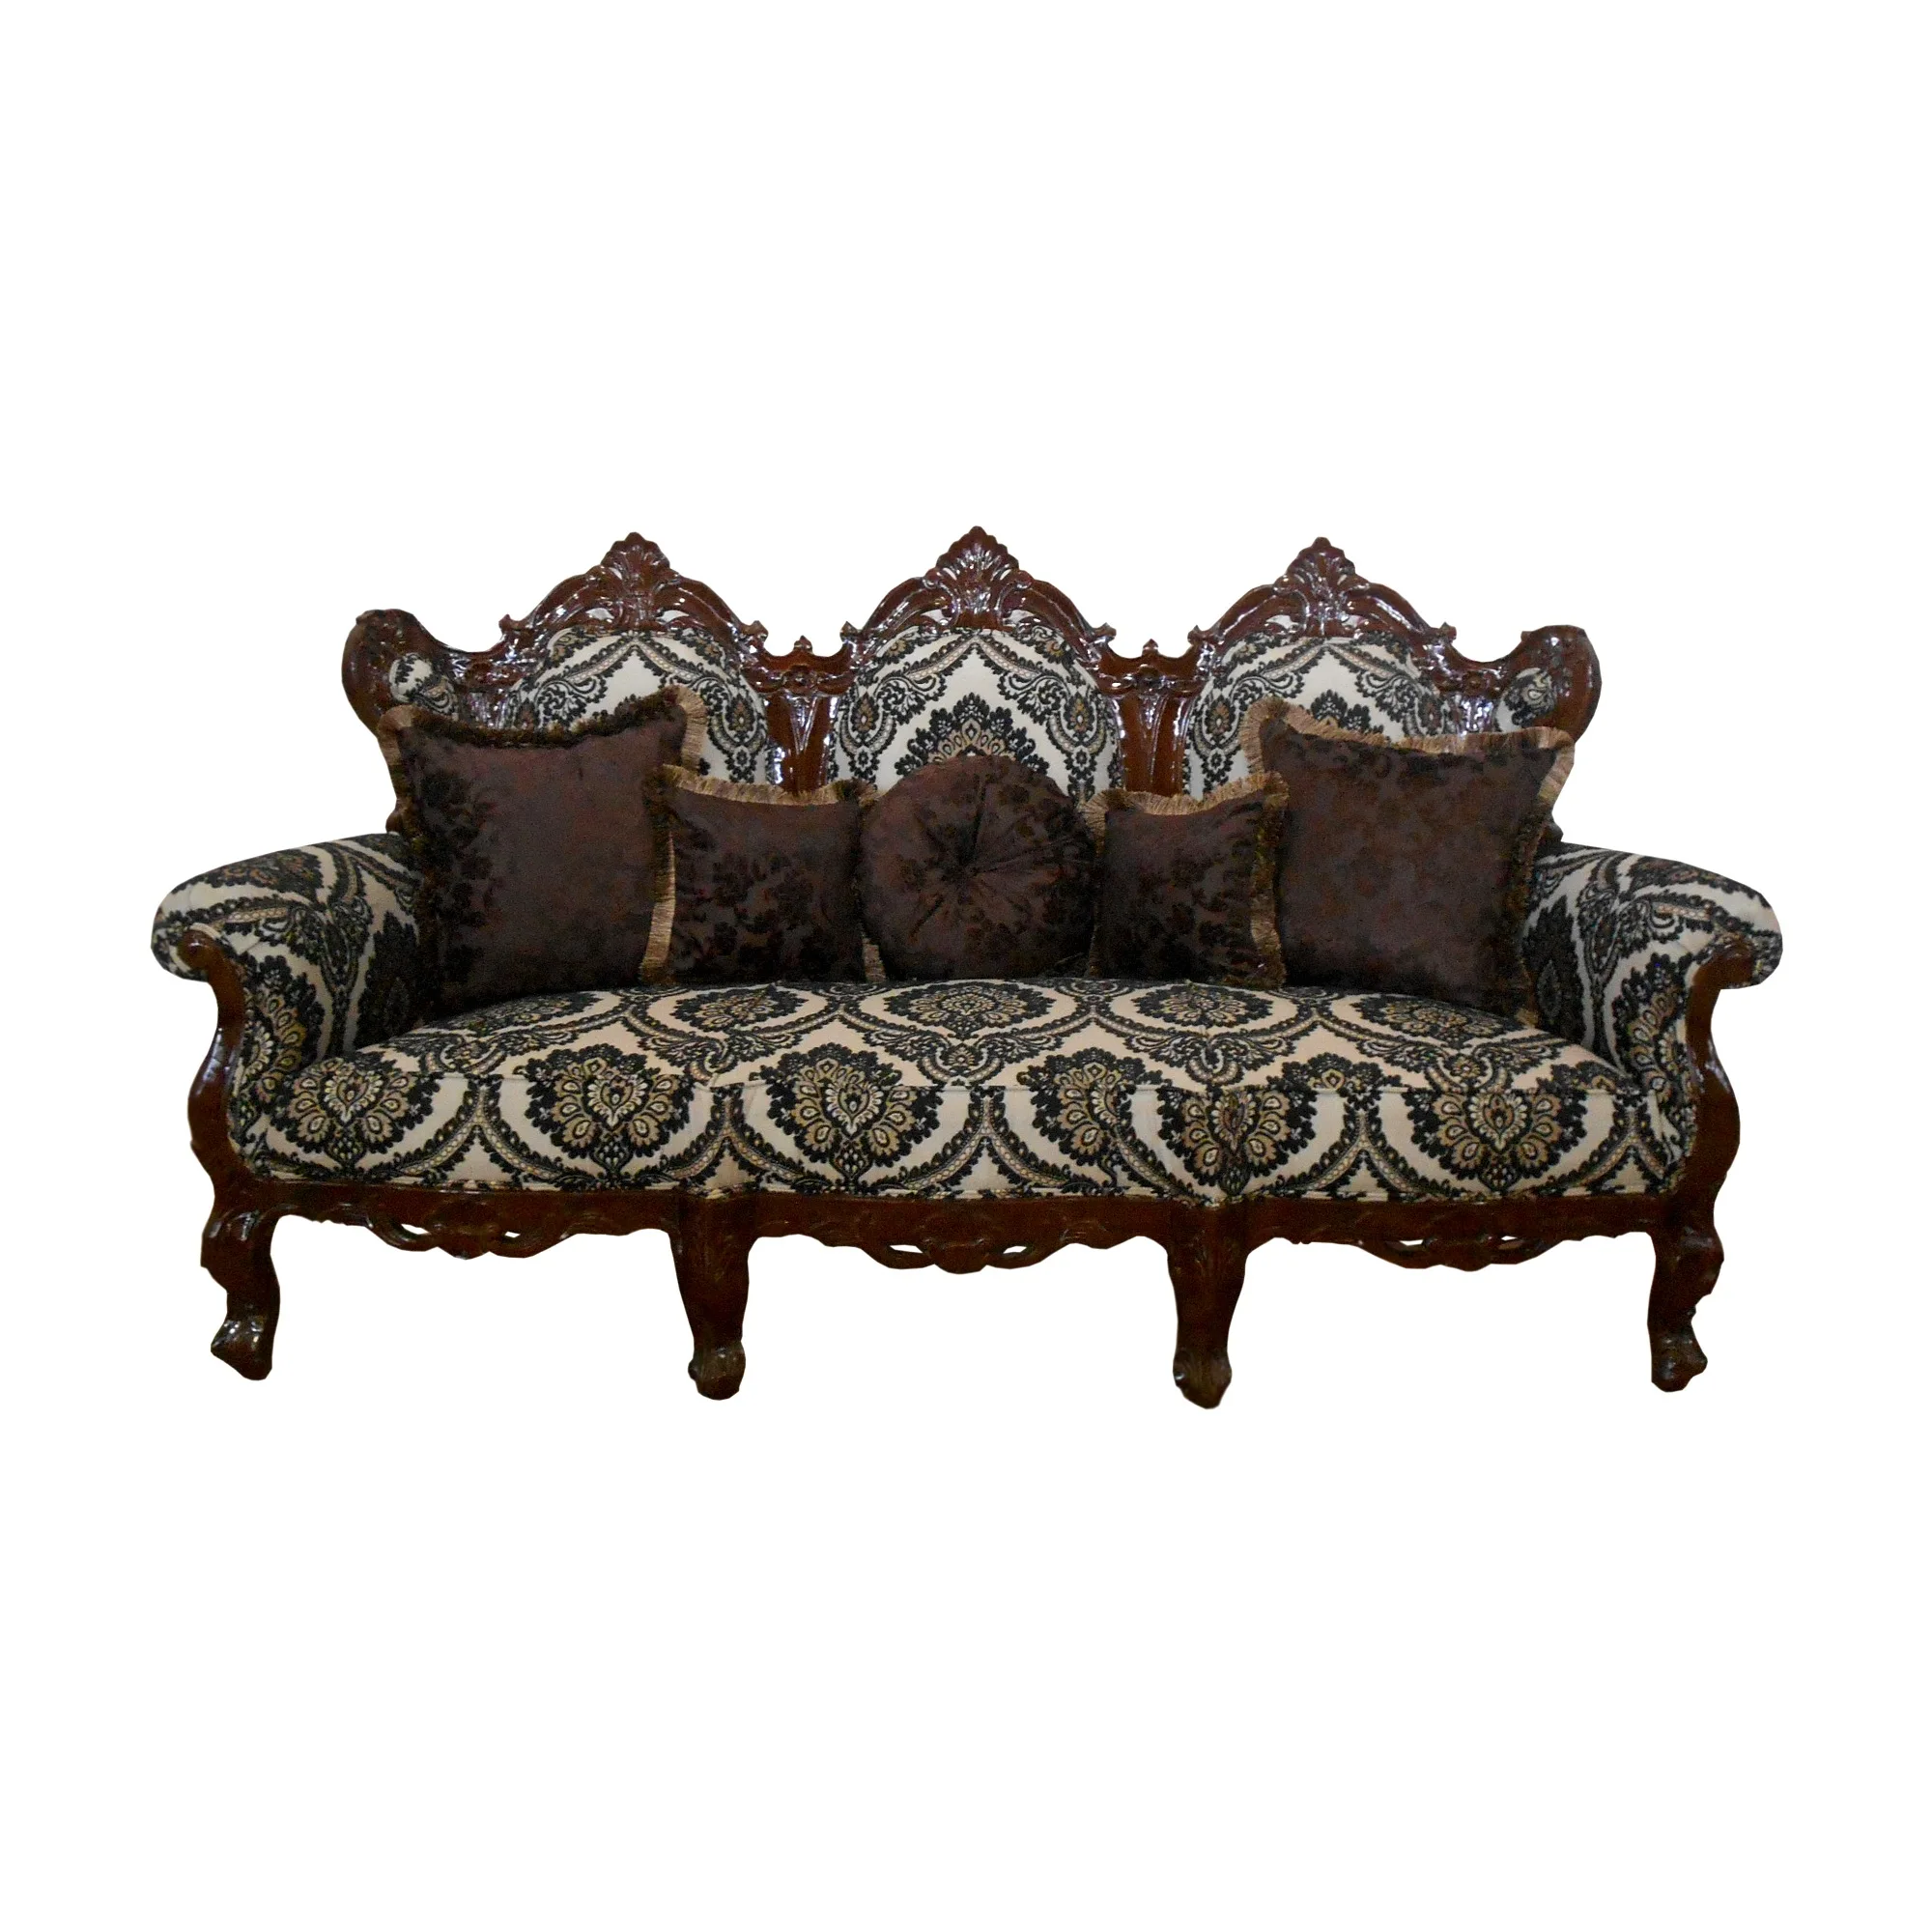 Living Room Teak Sofas With Antique Carving Furniture Style Buy